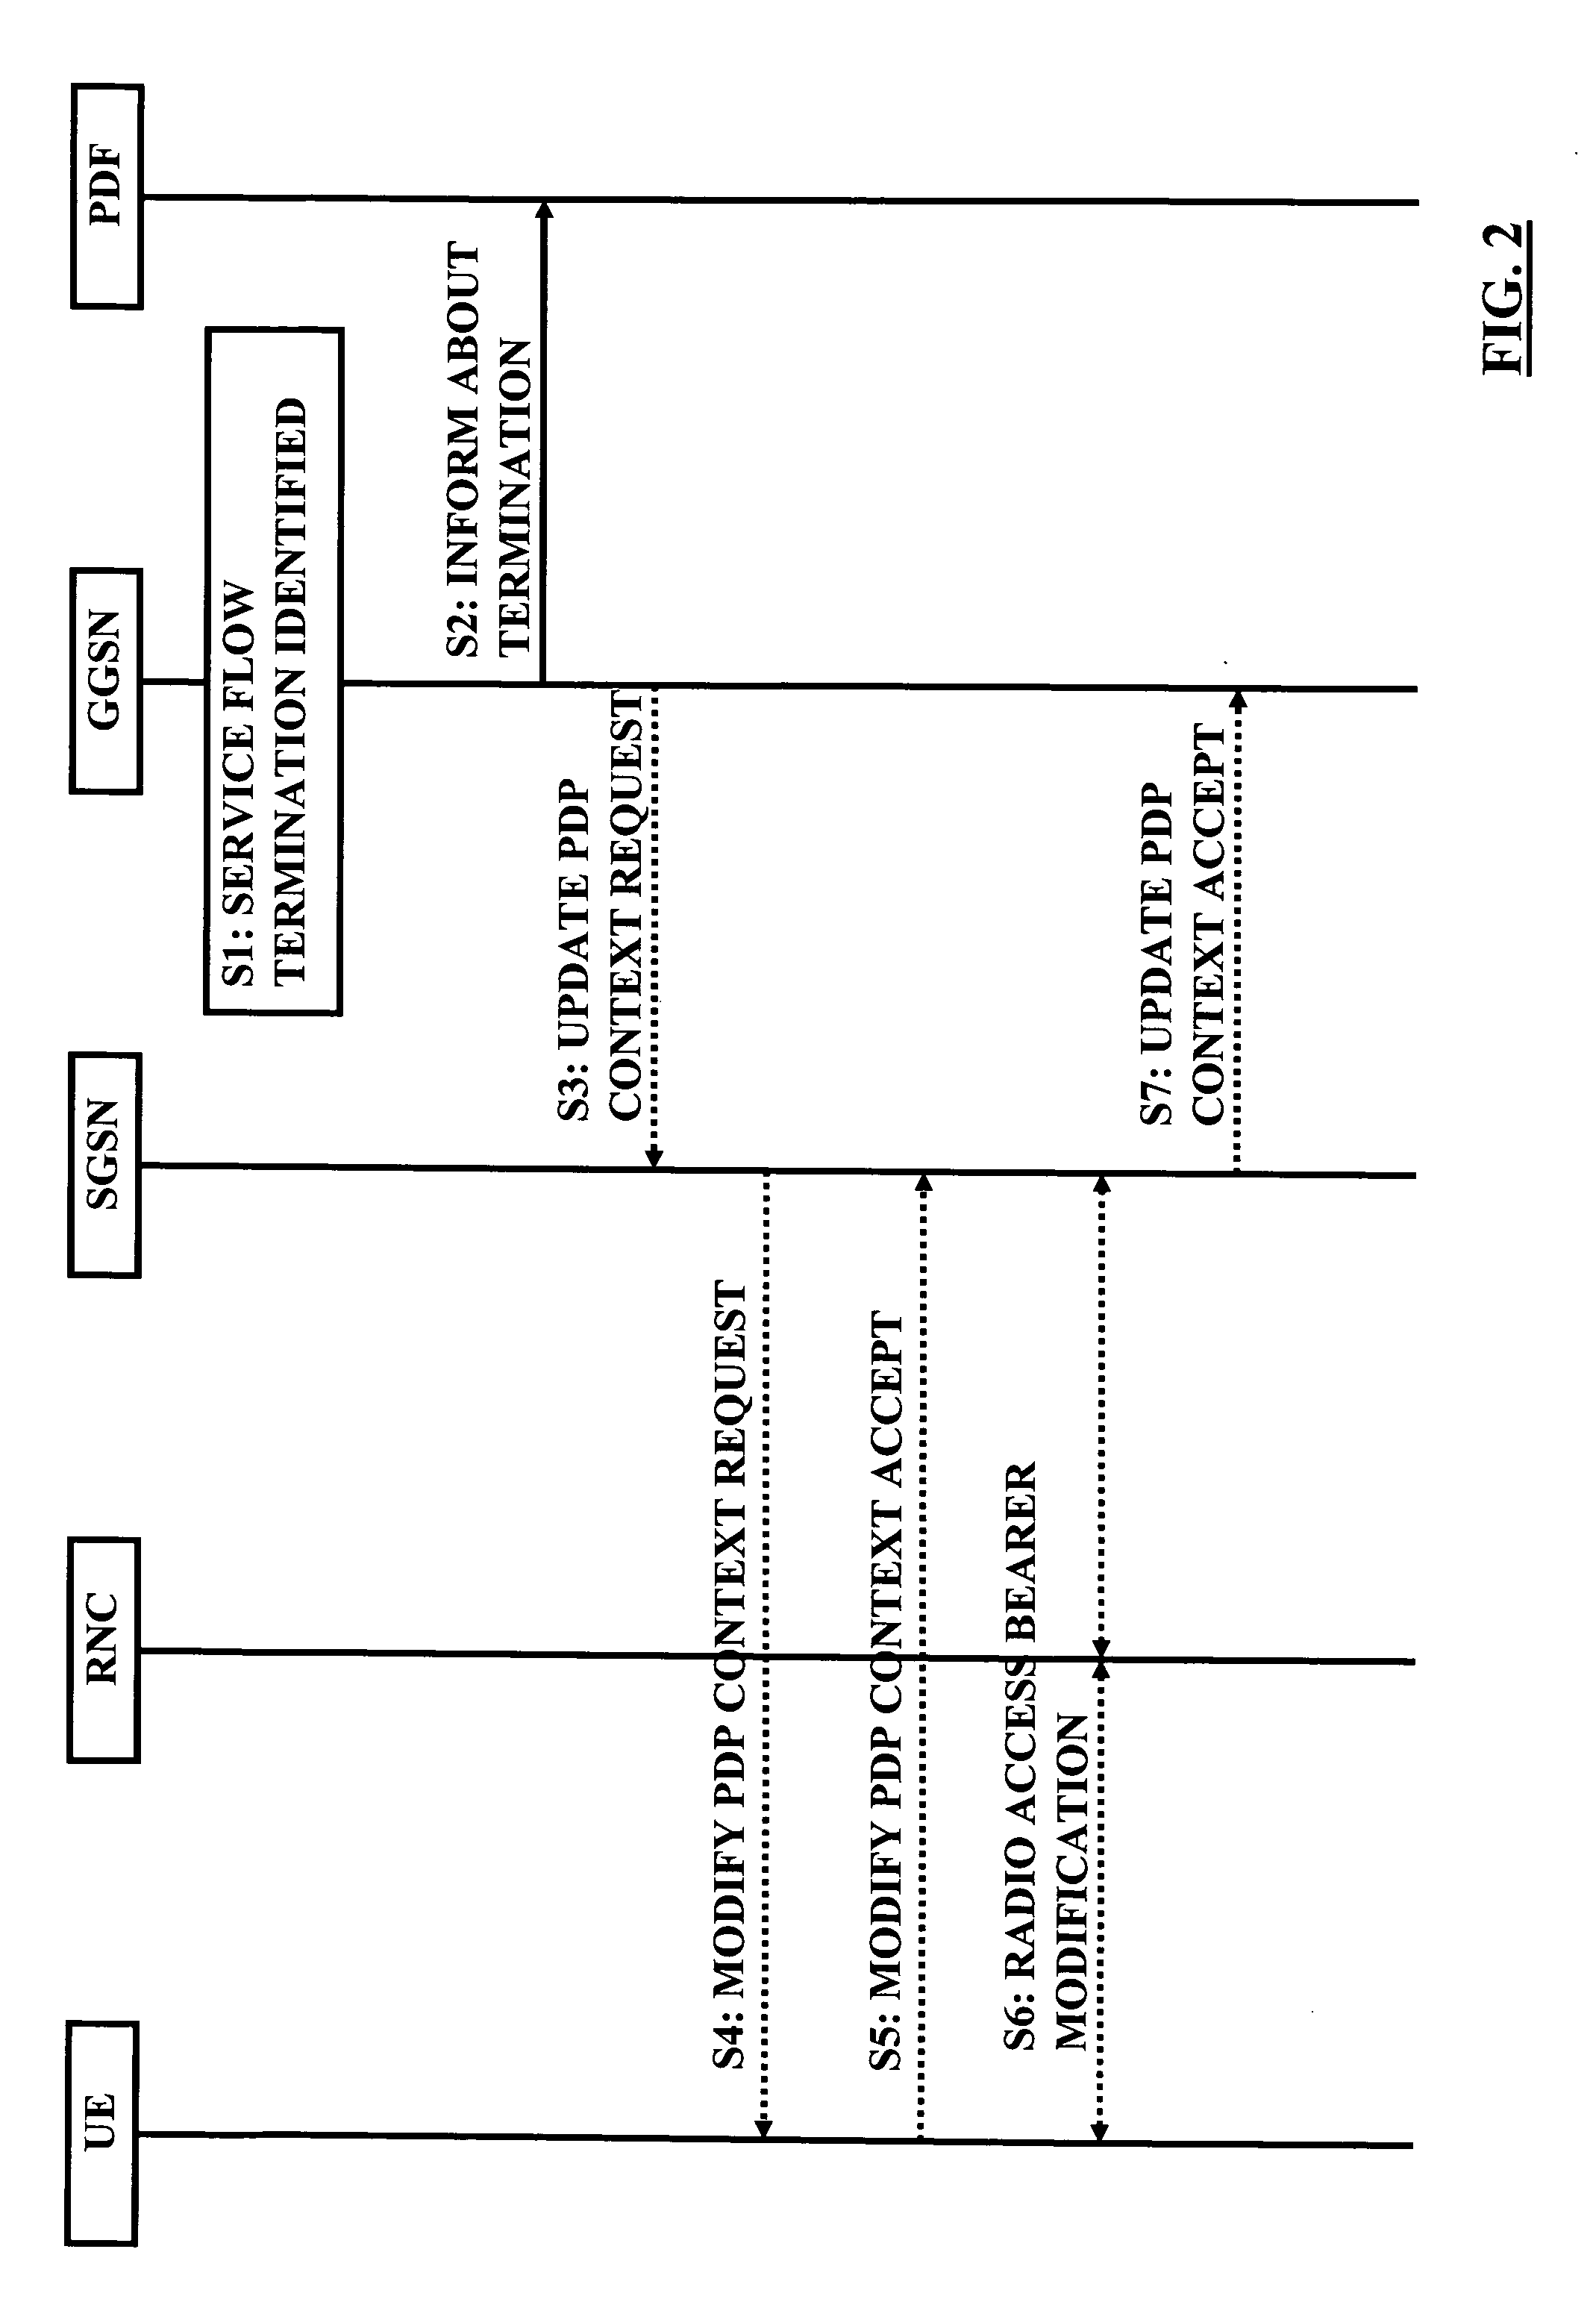 Indication of service flow termination by network control to policy decision function